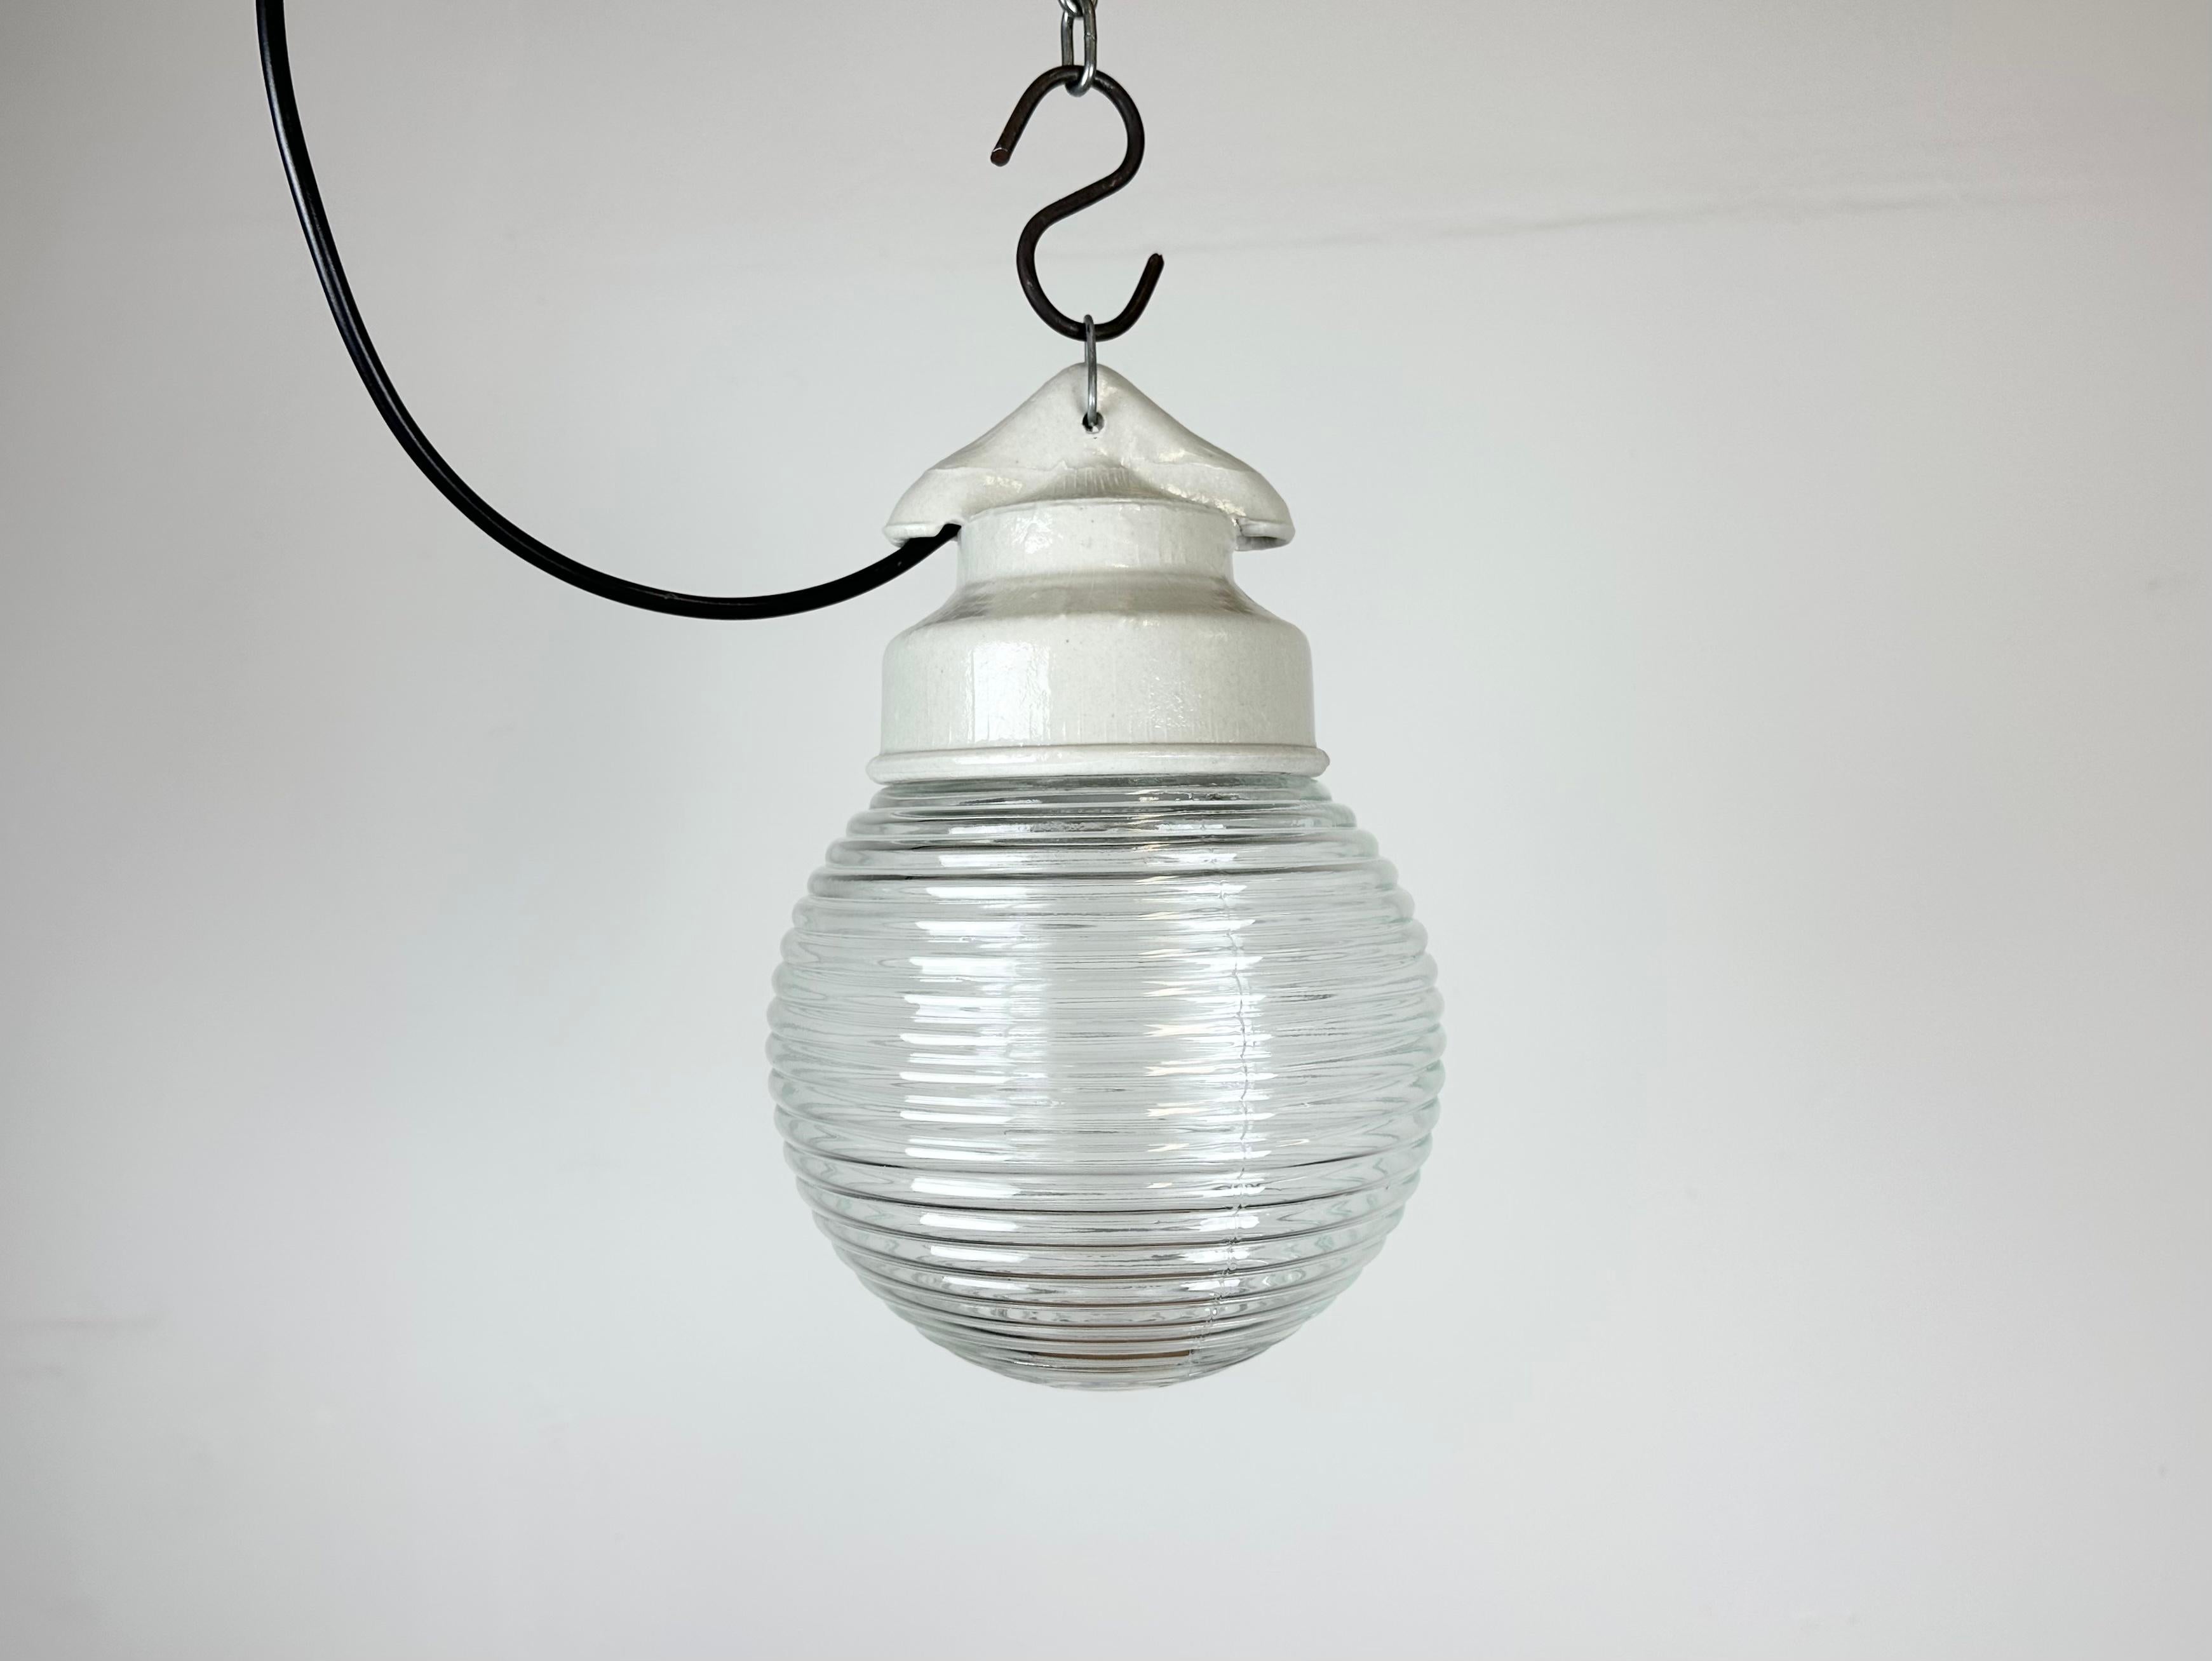 Vintage industrial light made in former Soviet Union during the 1970s.It features a white porcelain top and a light green ribbed glass cover. The socket requires E27/ E26 light bulbs. New wire. The weight of the light is 0,9 kg.